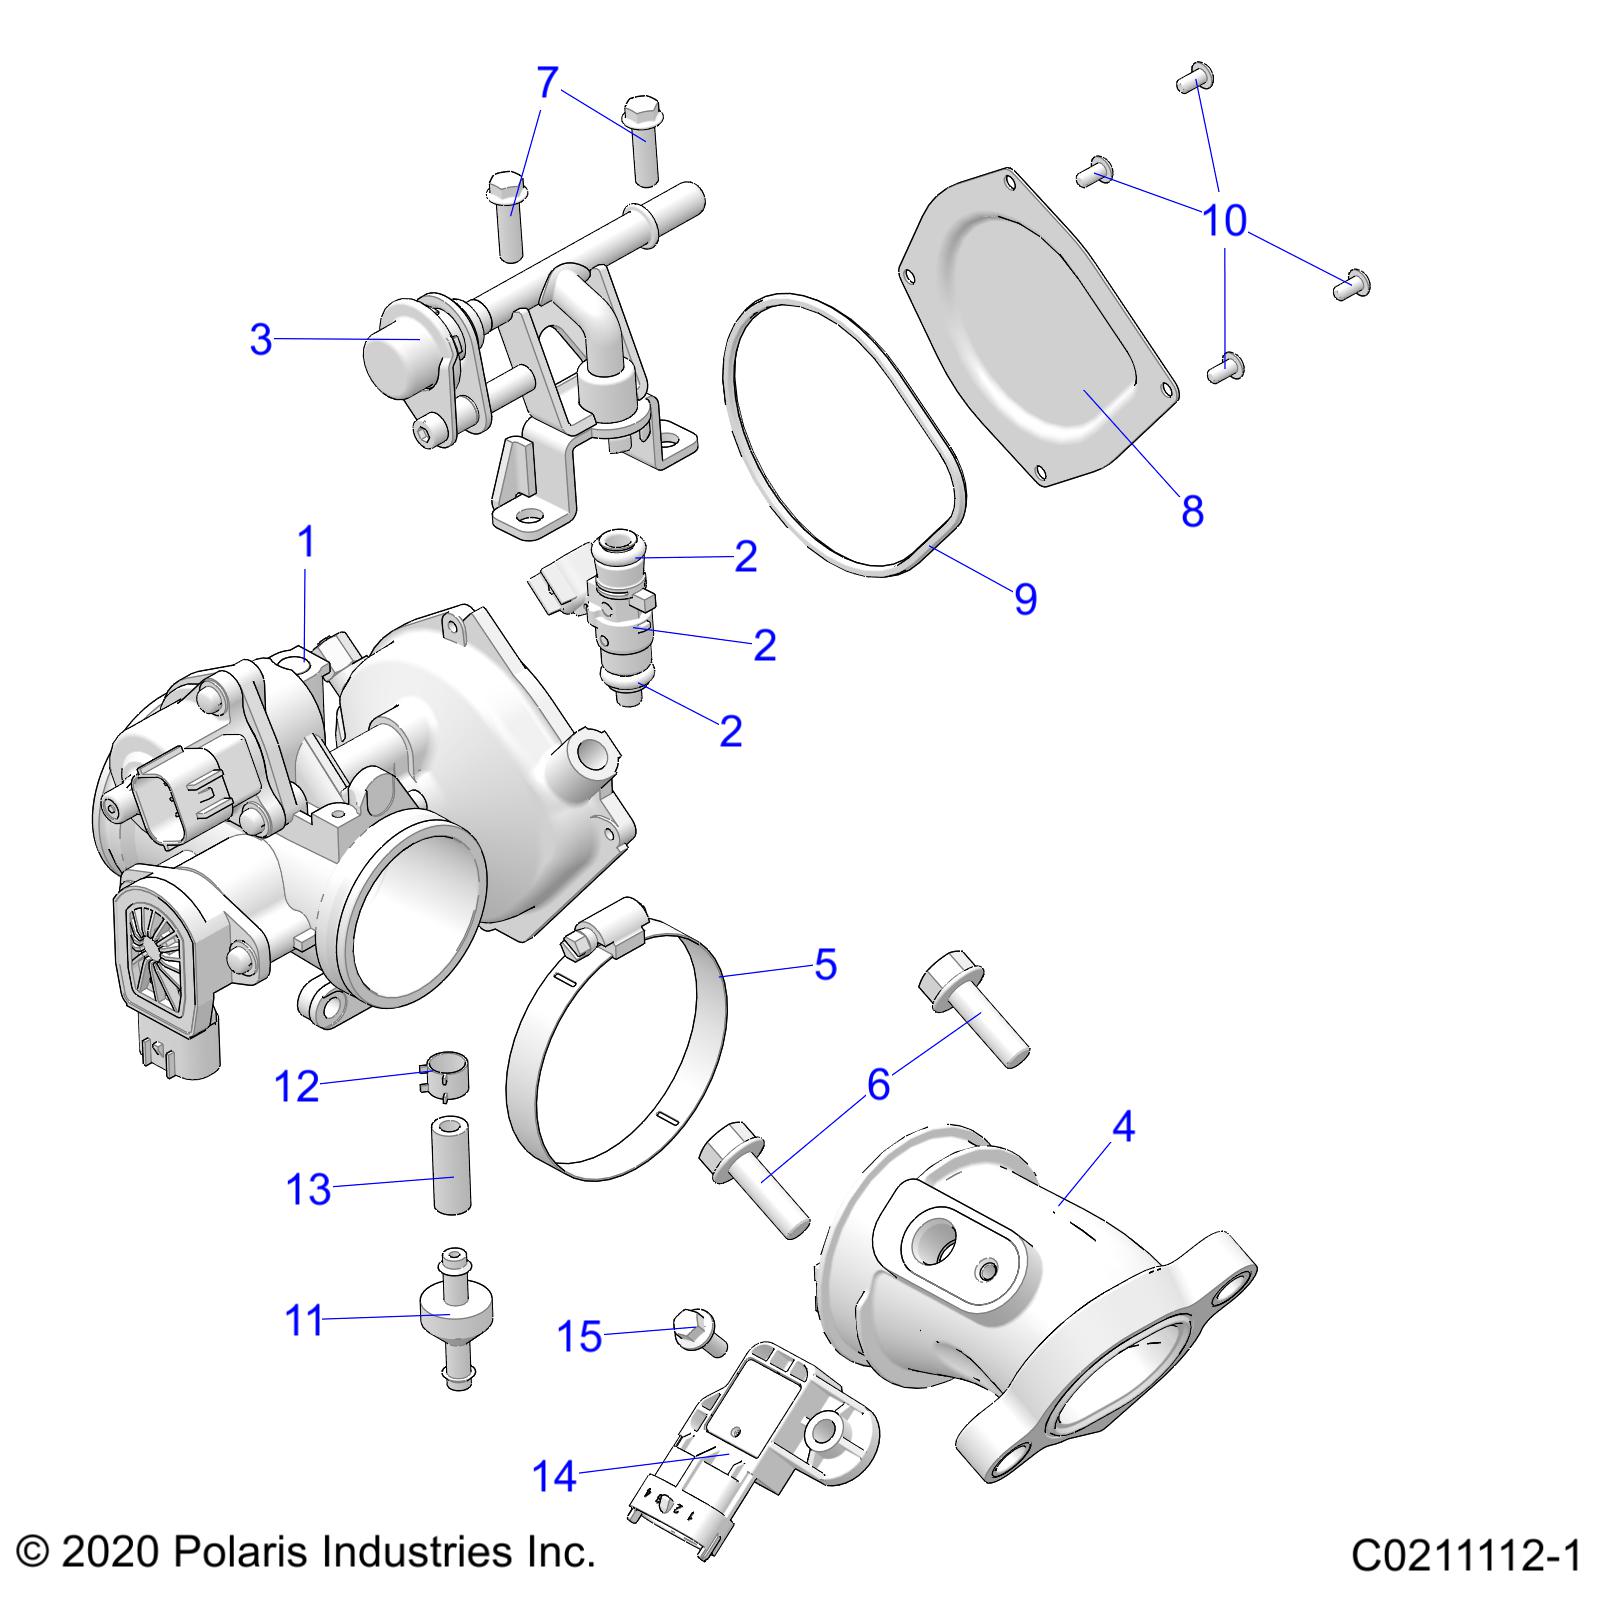 ENGINE, THROTTLE BODY and FUEL RAIL - A20SWE57A1/3A1 (C0211112-1)